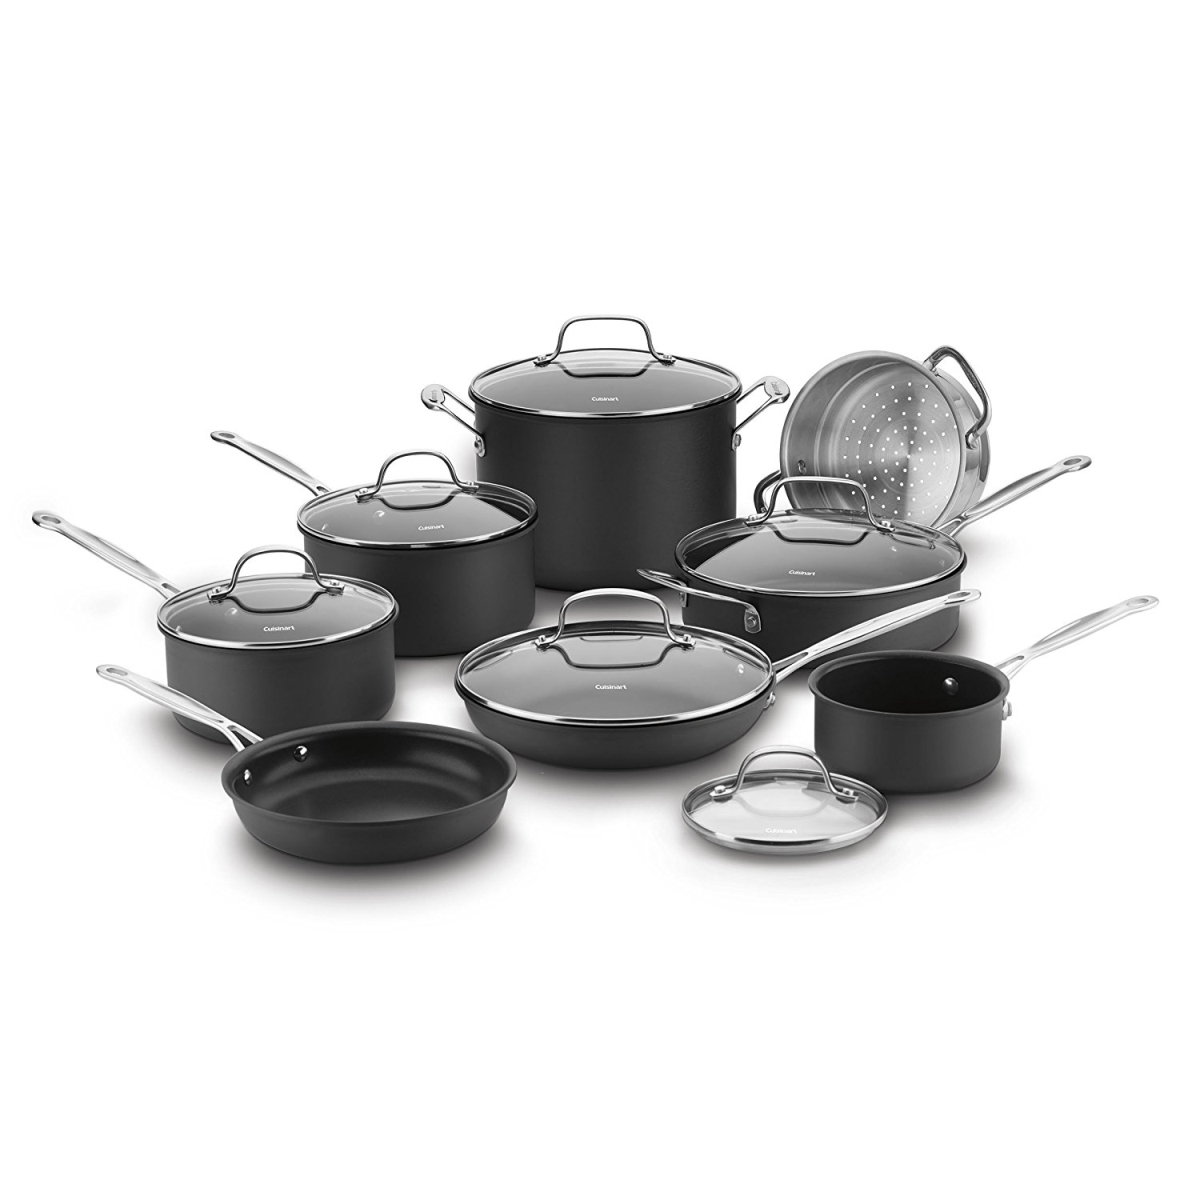 66-14n Non Stick Hard Anodized Set Chefs Classic, 14 Piece - Gray